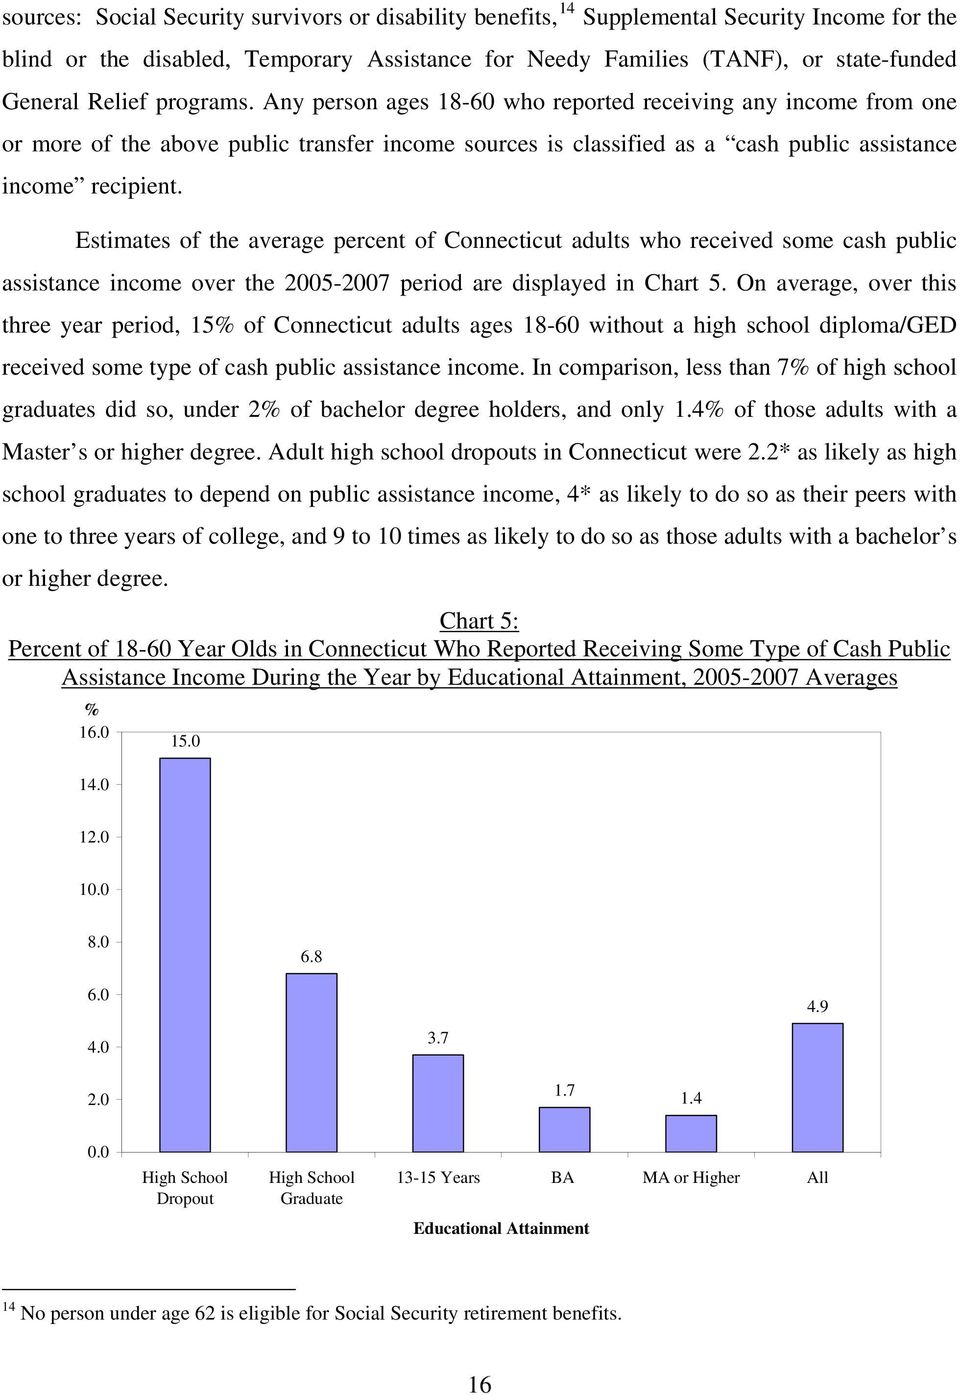 Estimates of the average percent of Connecticut adults who received some cash public assistance income over the 2005-2007 period are displayed in Chart 5.